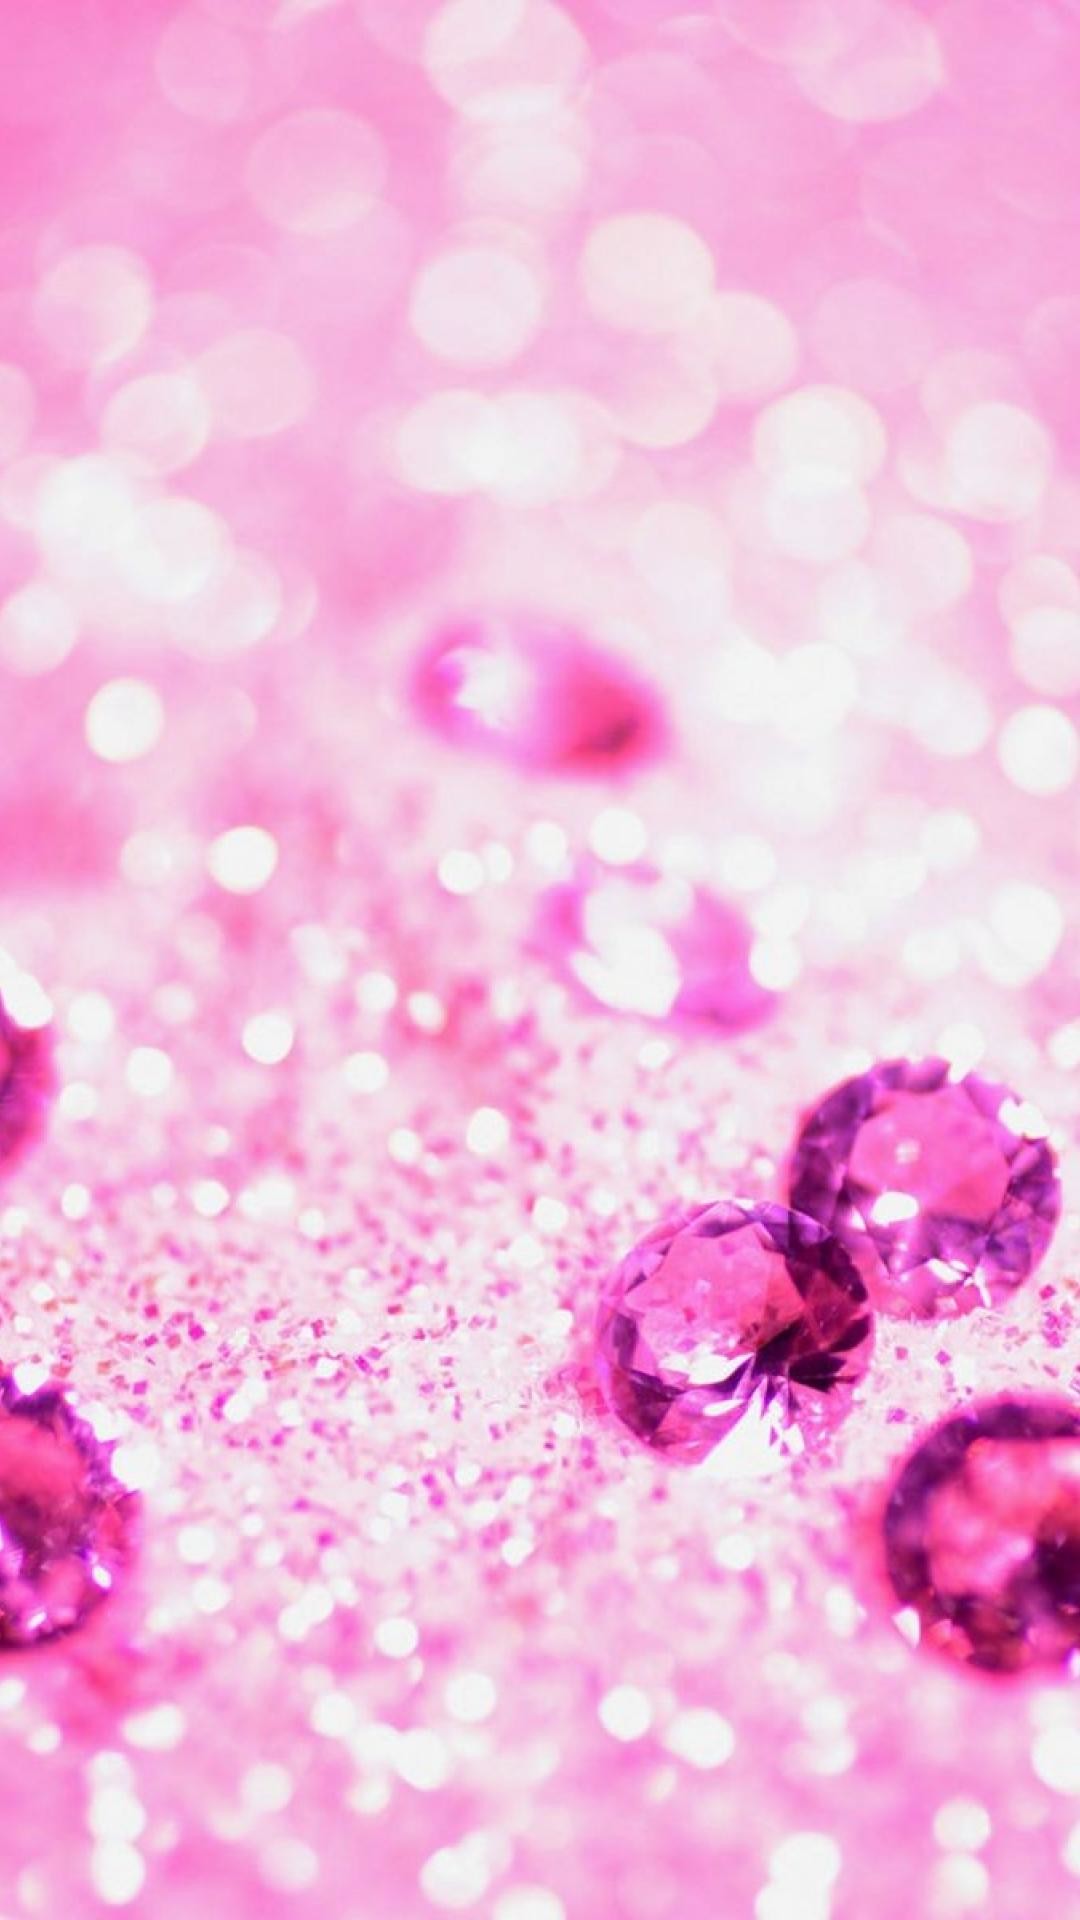 Lots of pink jewelry. Girly glitter iPhone wallpaper